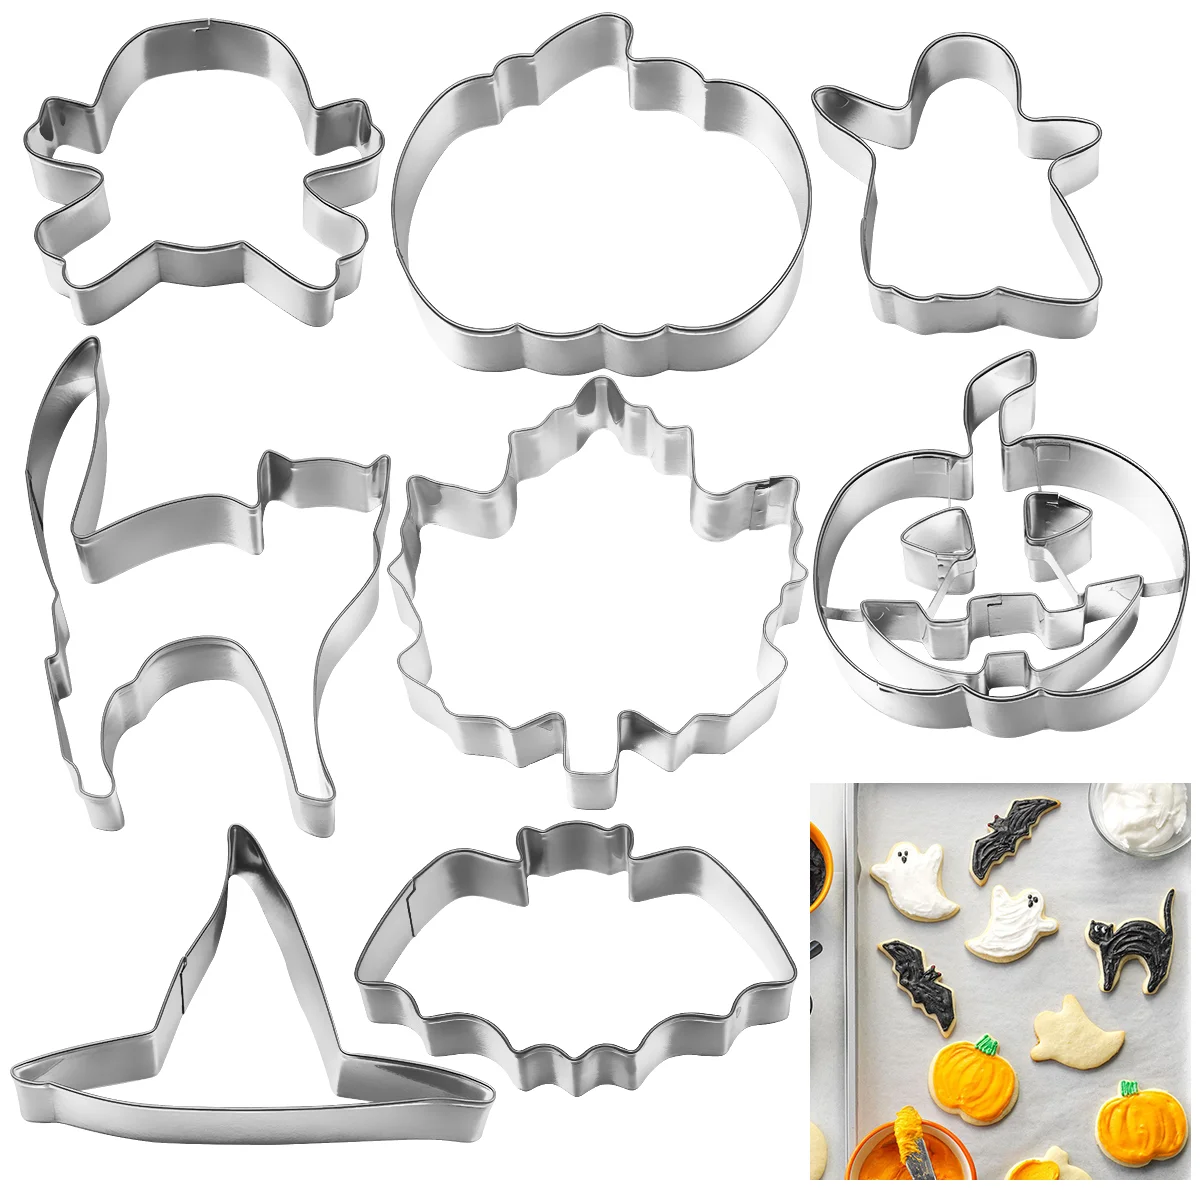 

8Pcs Cookie Set- Pumpkin, Bat,, Witch Hat, Cat, Leaf, Metal Stainless Steel Fondant Biscuit, Party Trick or Treat Supplies